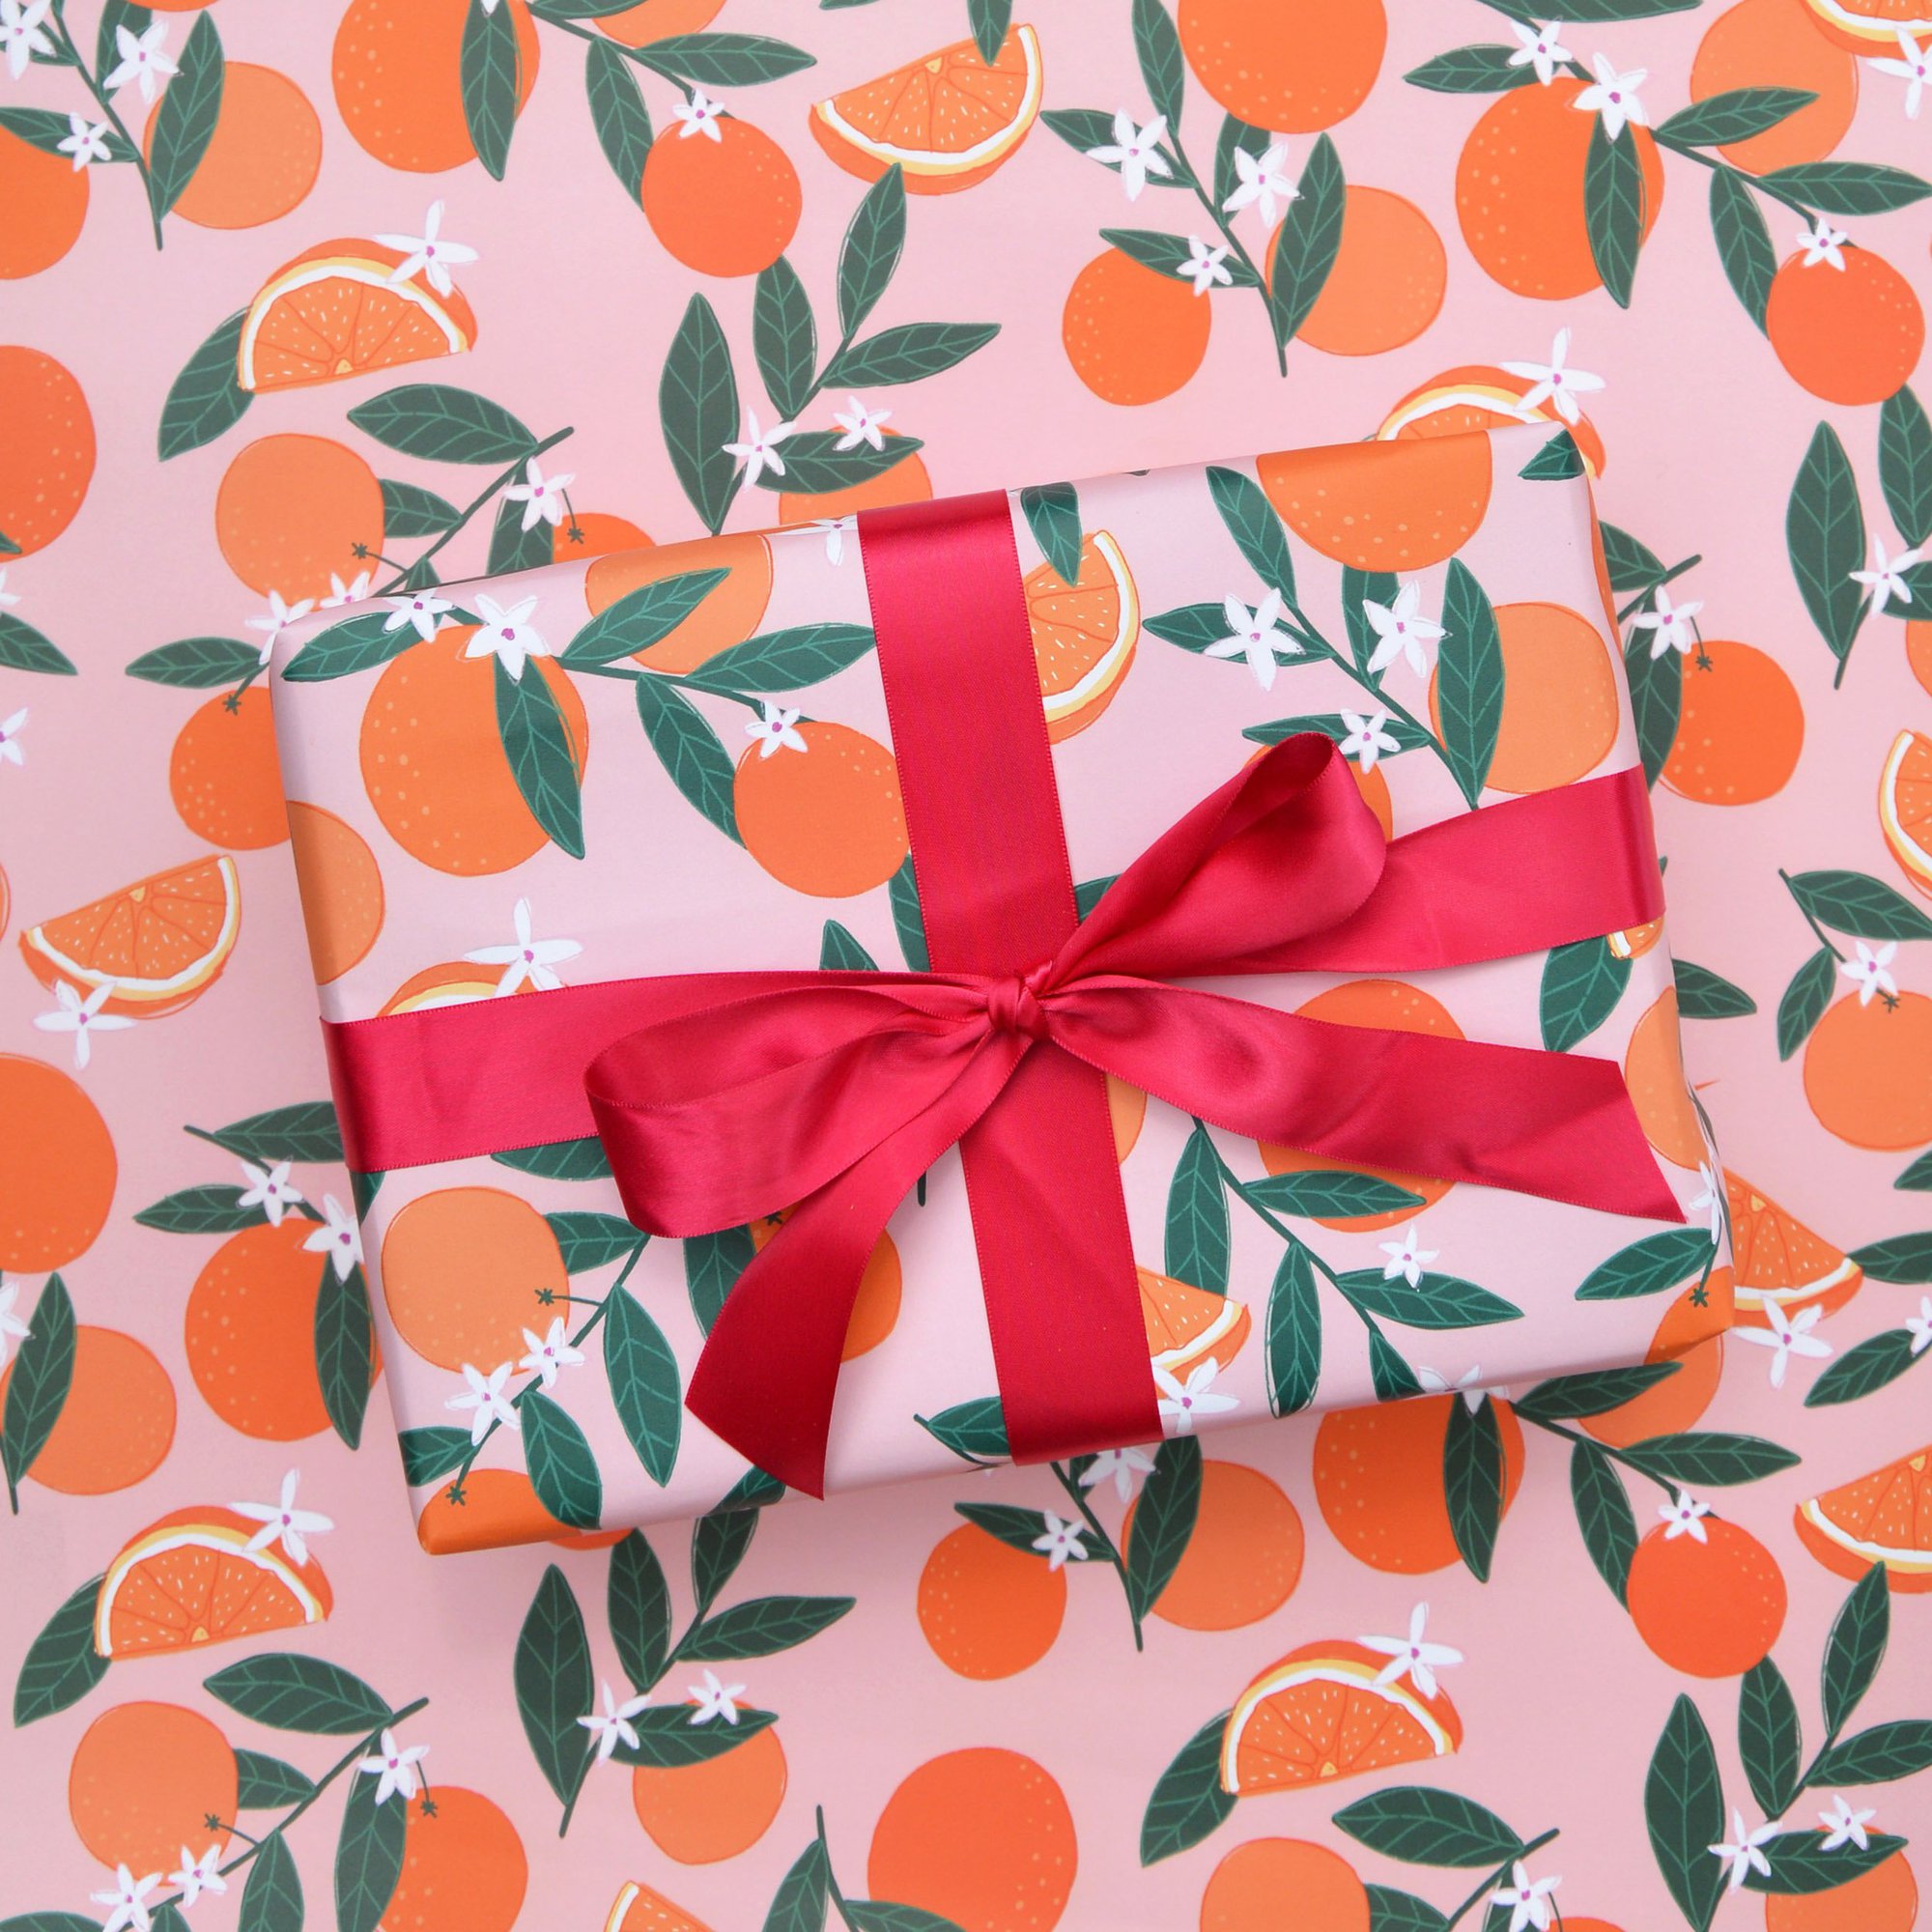 Sevilla Oranges Wrapping Paper - 2 sheets & 2 tags oranges wrap